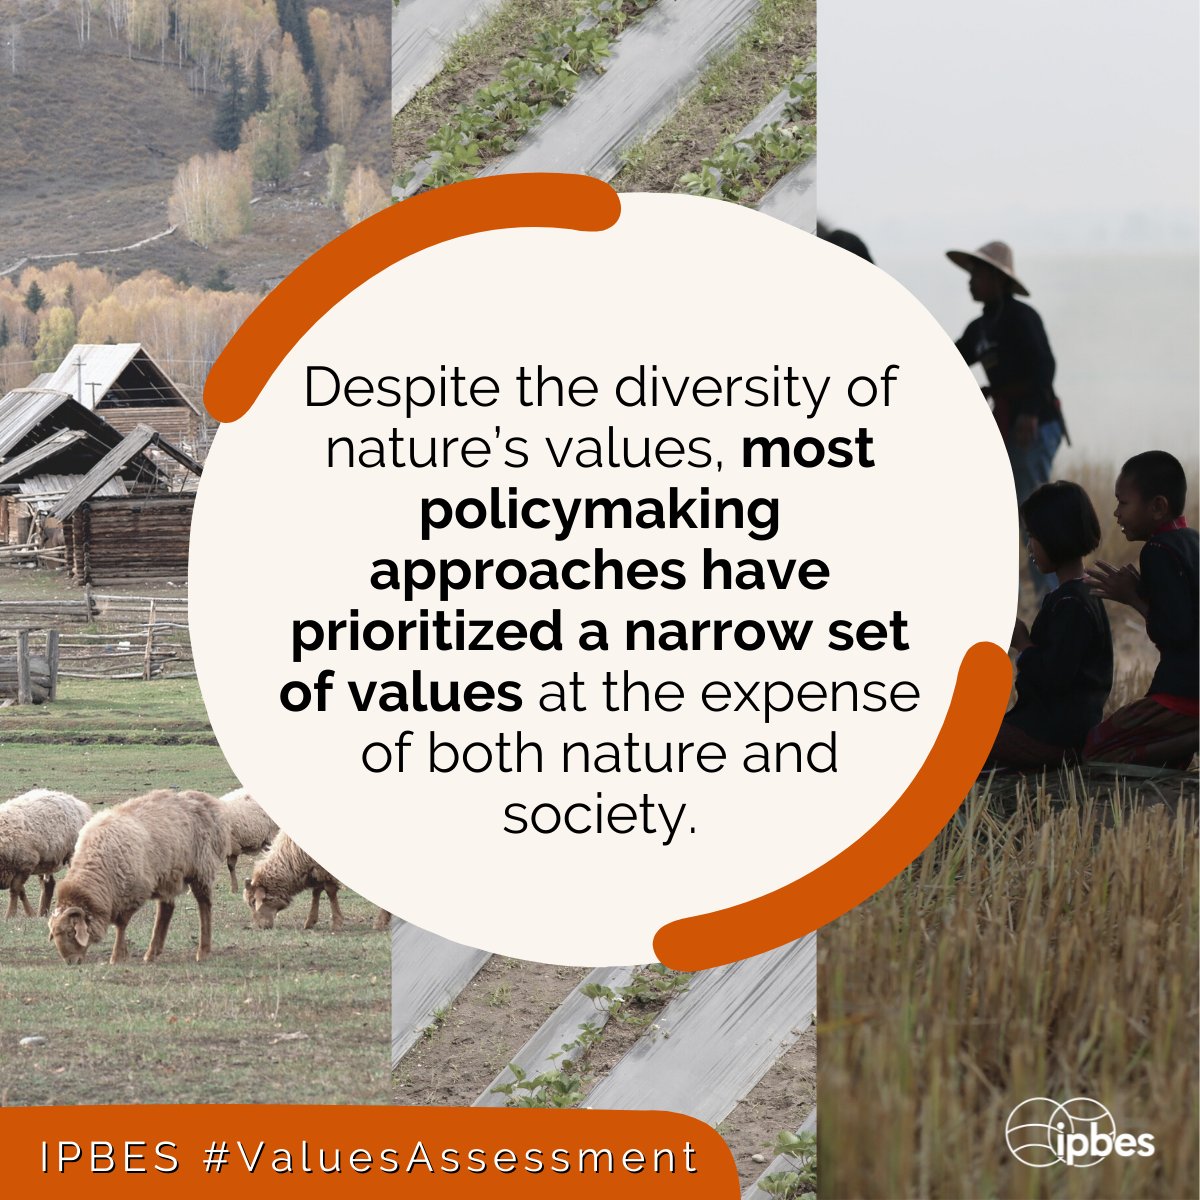 The way nature is valued in political and economic decisions is both a key driver of the global biodiversity crisis AND a vital opportunity to address it, acc. to the newly released @IPBES #ValuesAssessment 🌱📗

Access the report 👉 bit.ly/IPBES_VA